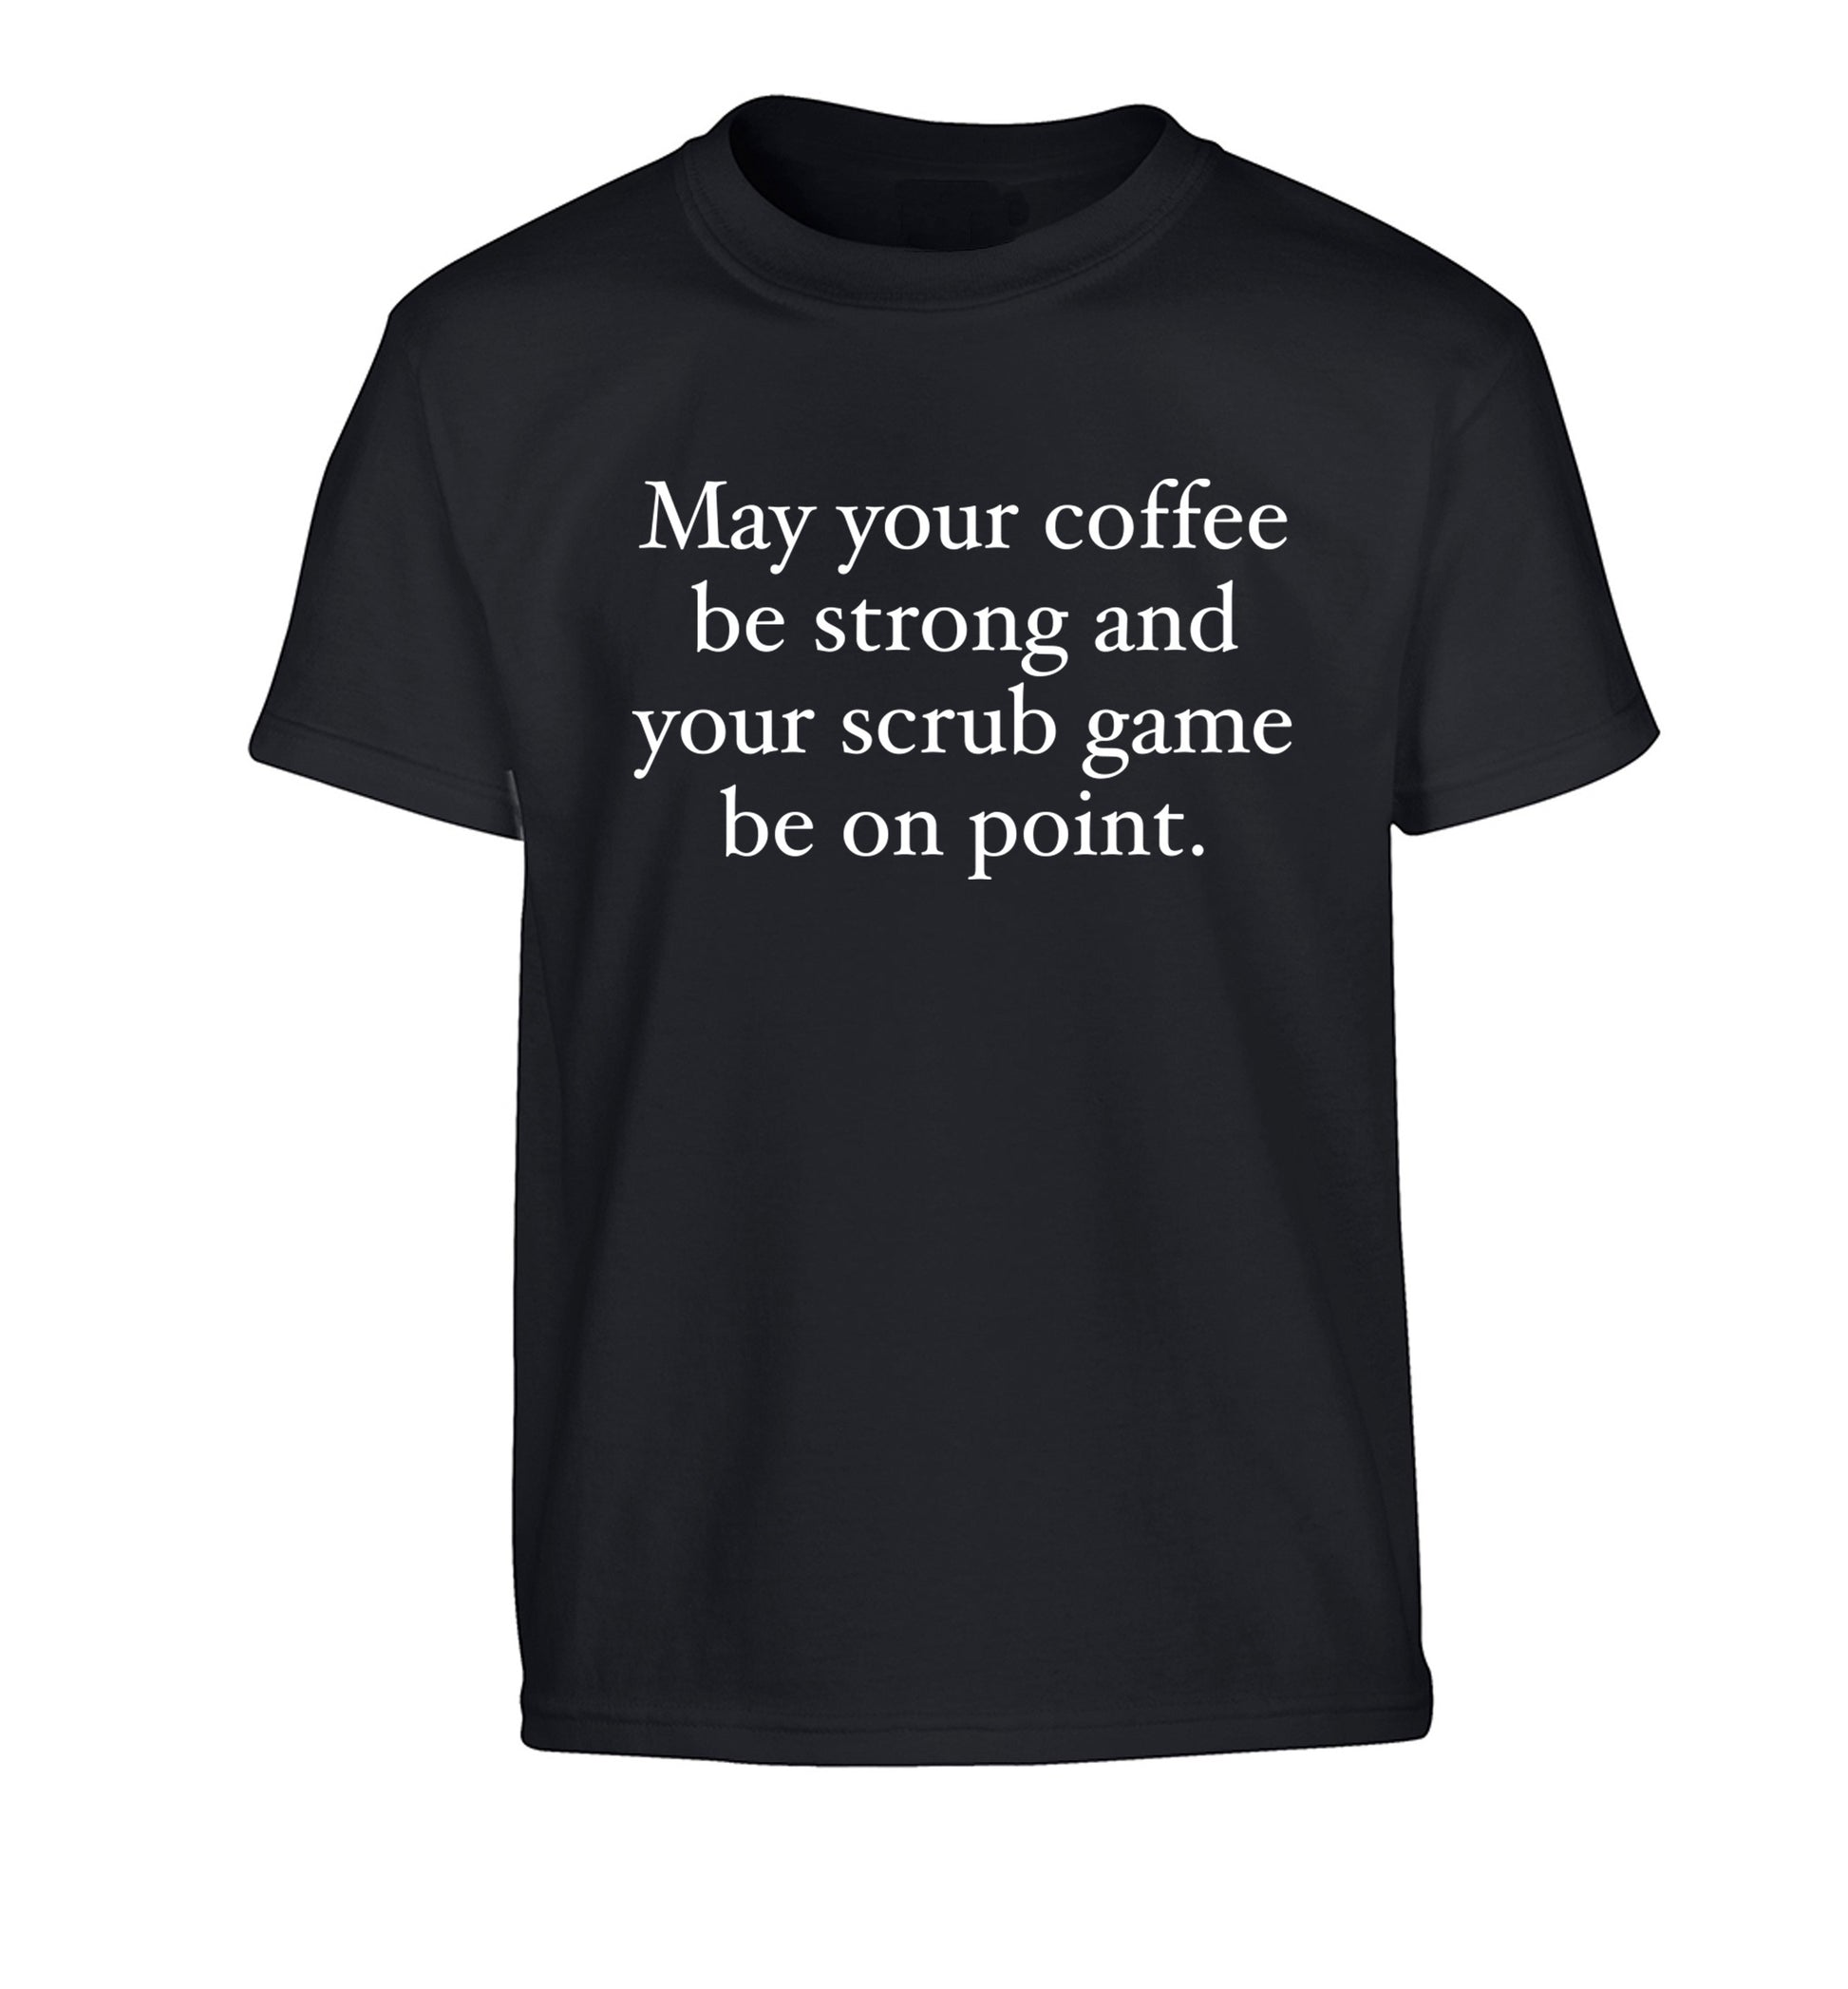 May your caffeine be strong and your scrub game be on point Children's black Tshirt 12-14 Years